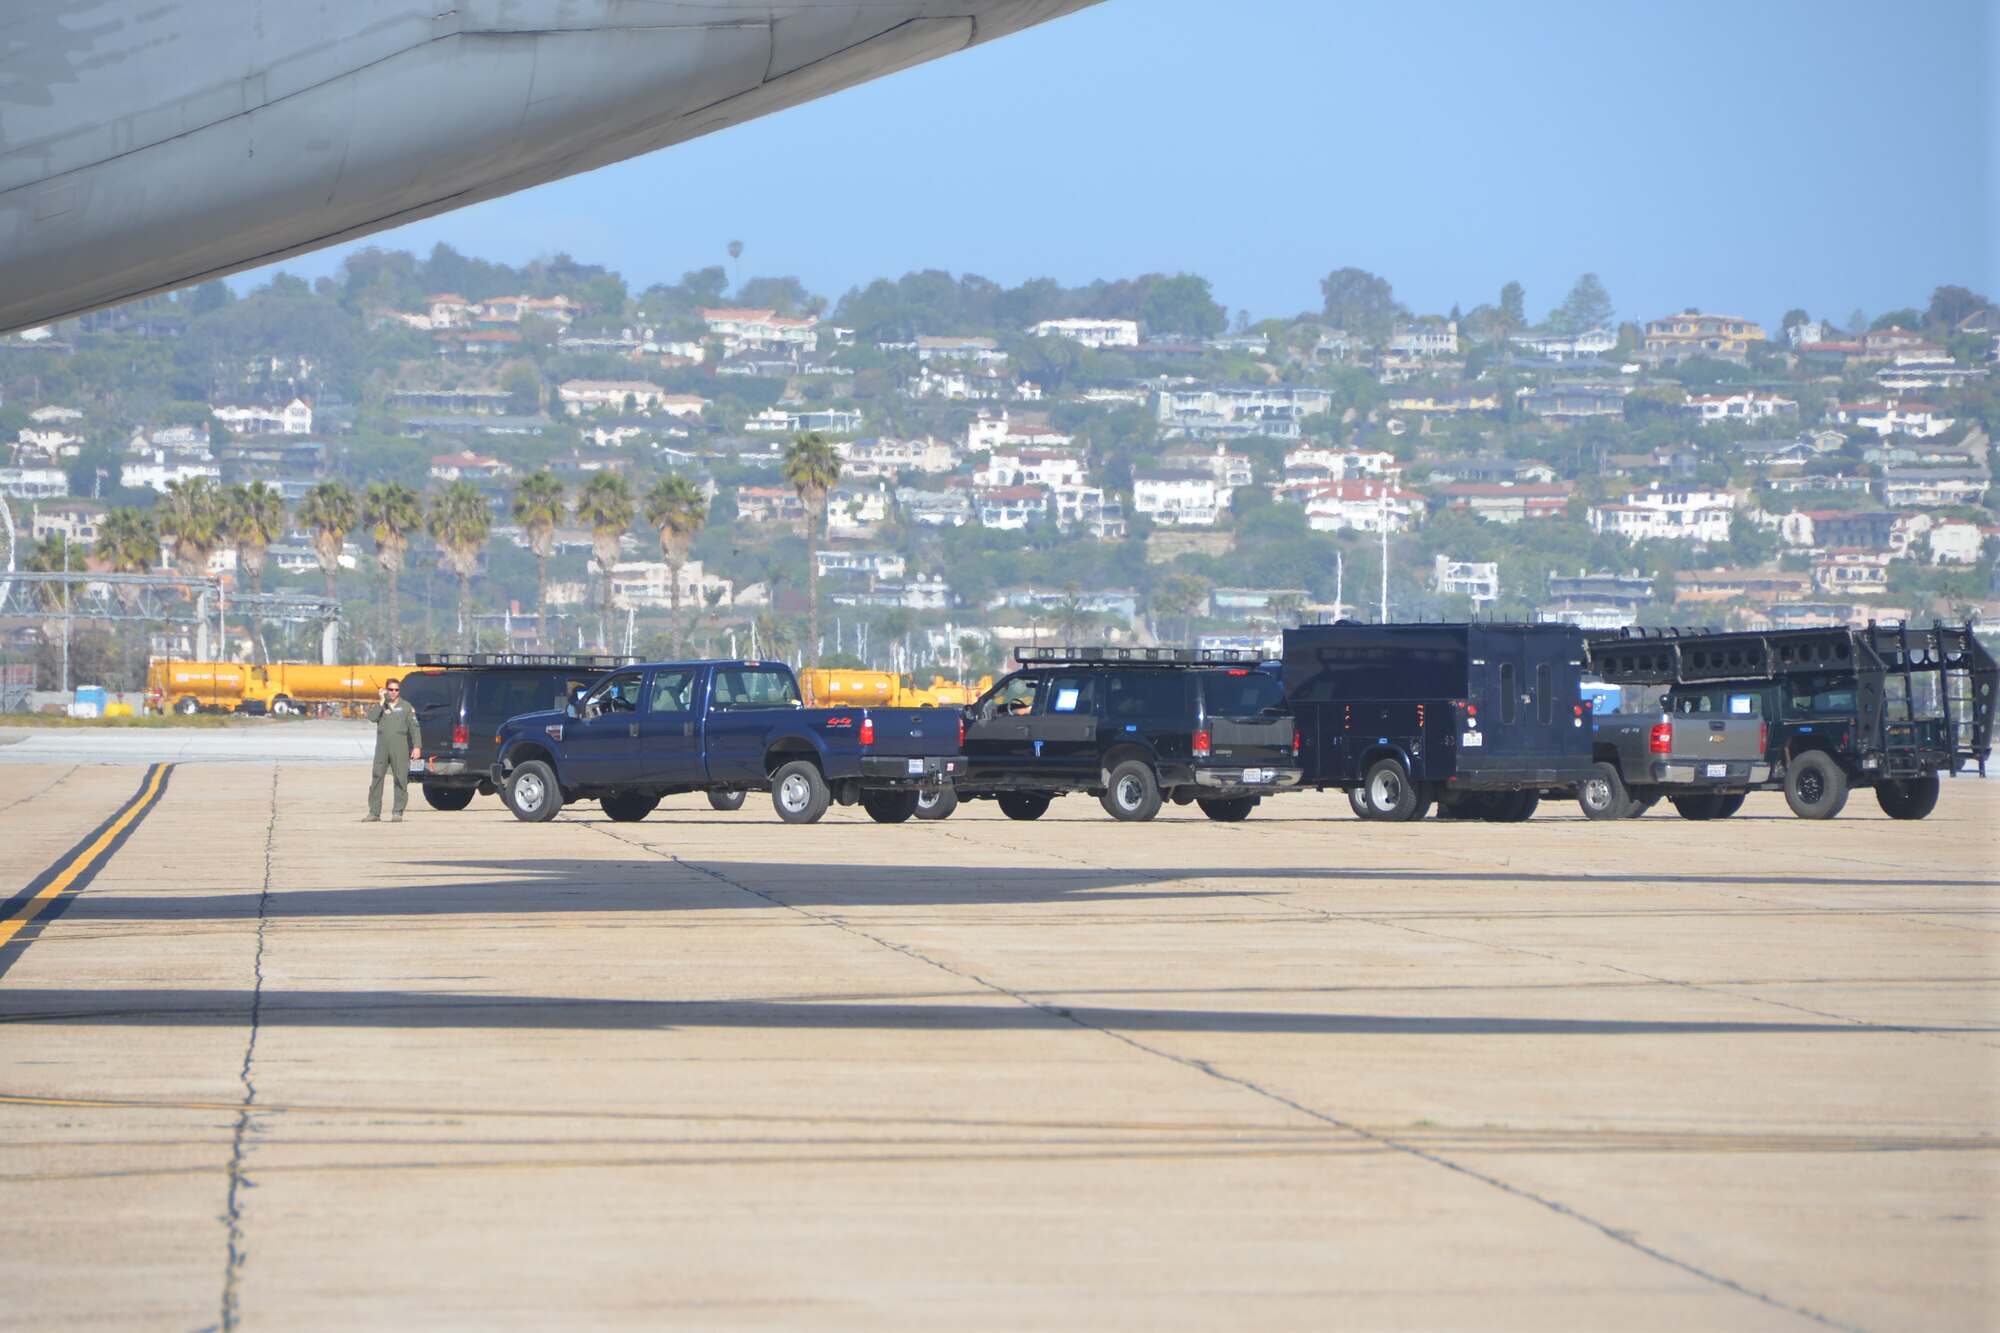 Several vehicles belonging to FBI’s Rapid Deployment Team from Los Angeles Calif., line the flight line, ready to be loaded on a C-5A Galaxy aircraft, April 24, 2014 at the Naval Air Station, North Island, Calif. The FBI’s RDT was one of several affiliates who participated in the annual Patriot Hook Exercise, sponsored by the Air Force Reserve Command that integrates federal agencies with the military, for world-wide mobility and readiness. (U.S. Air Force photo/Senior Master Sgt. Minnie Jones)


